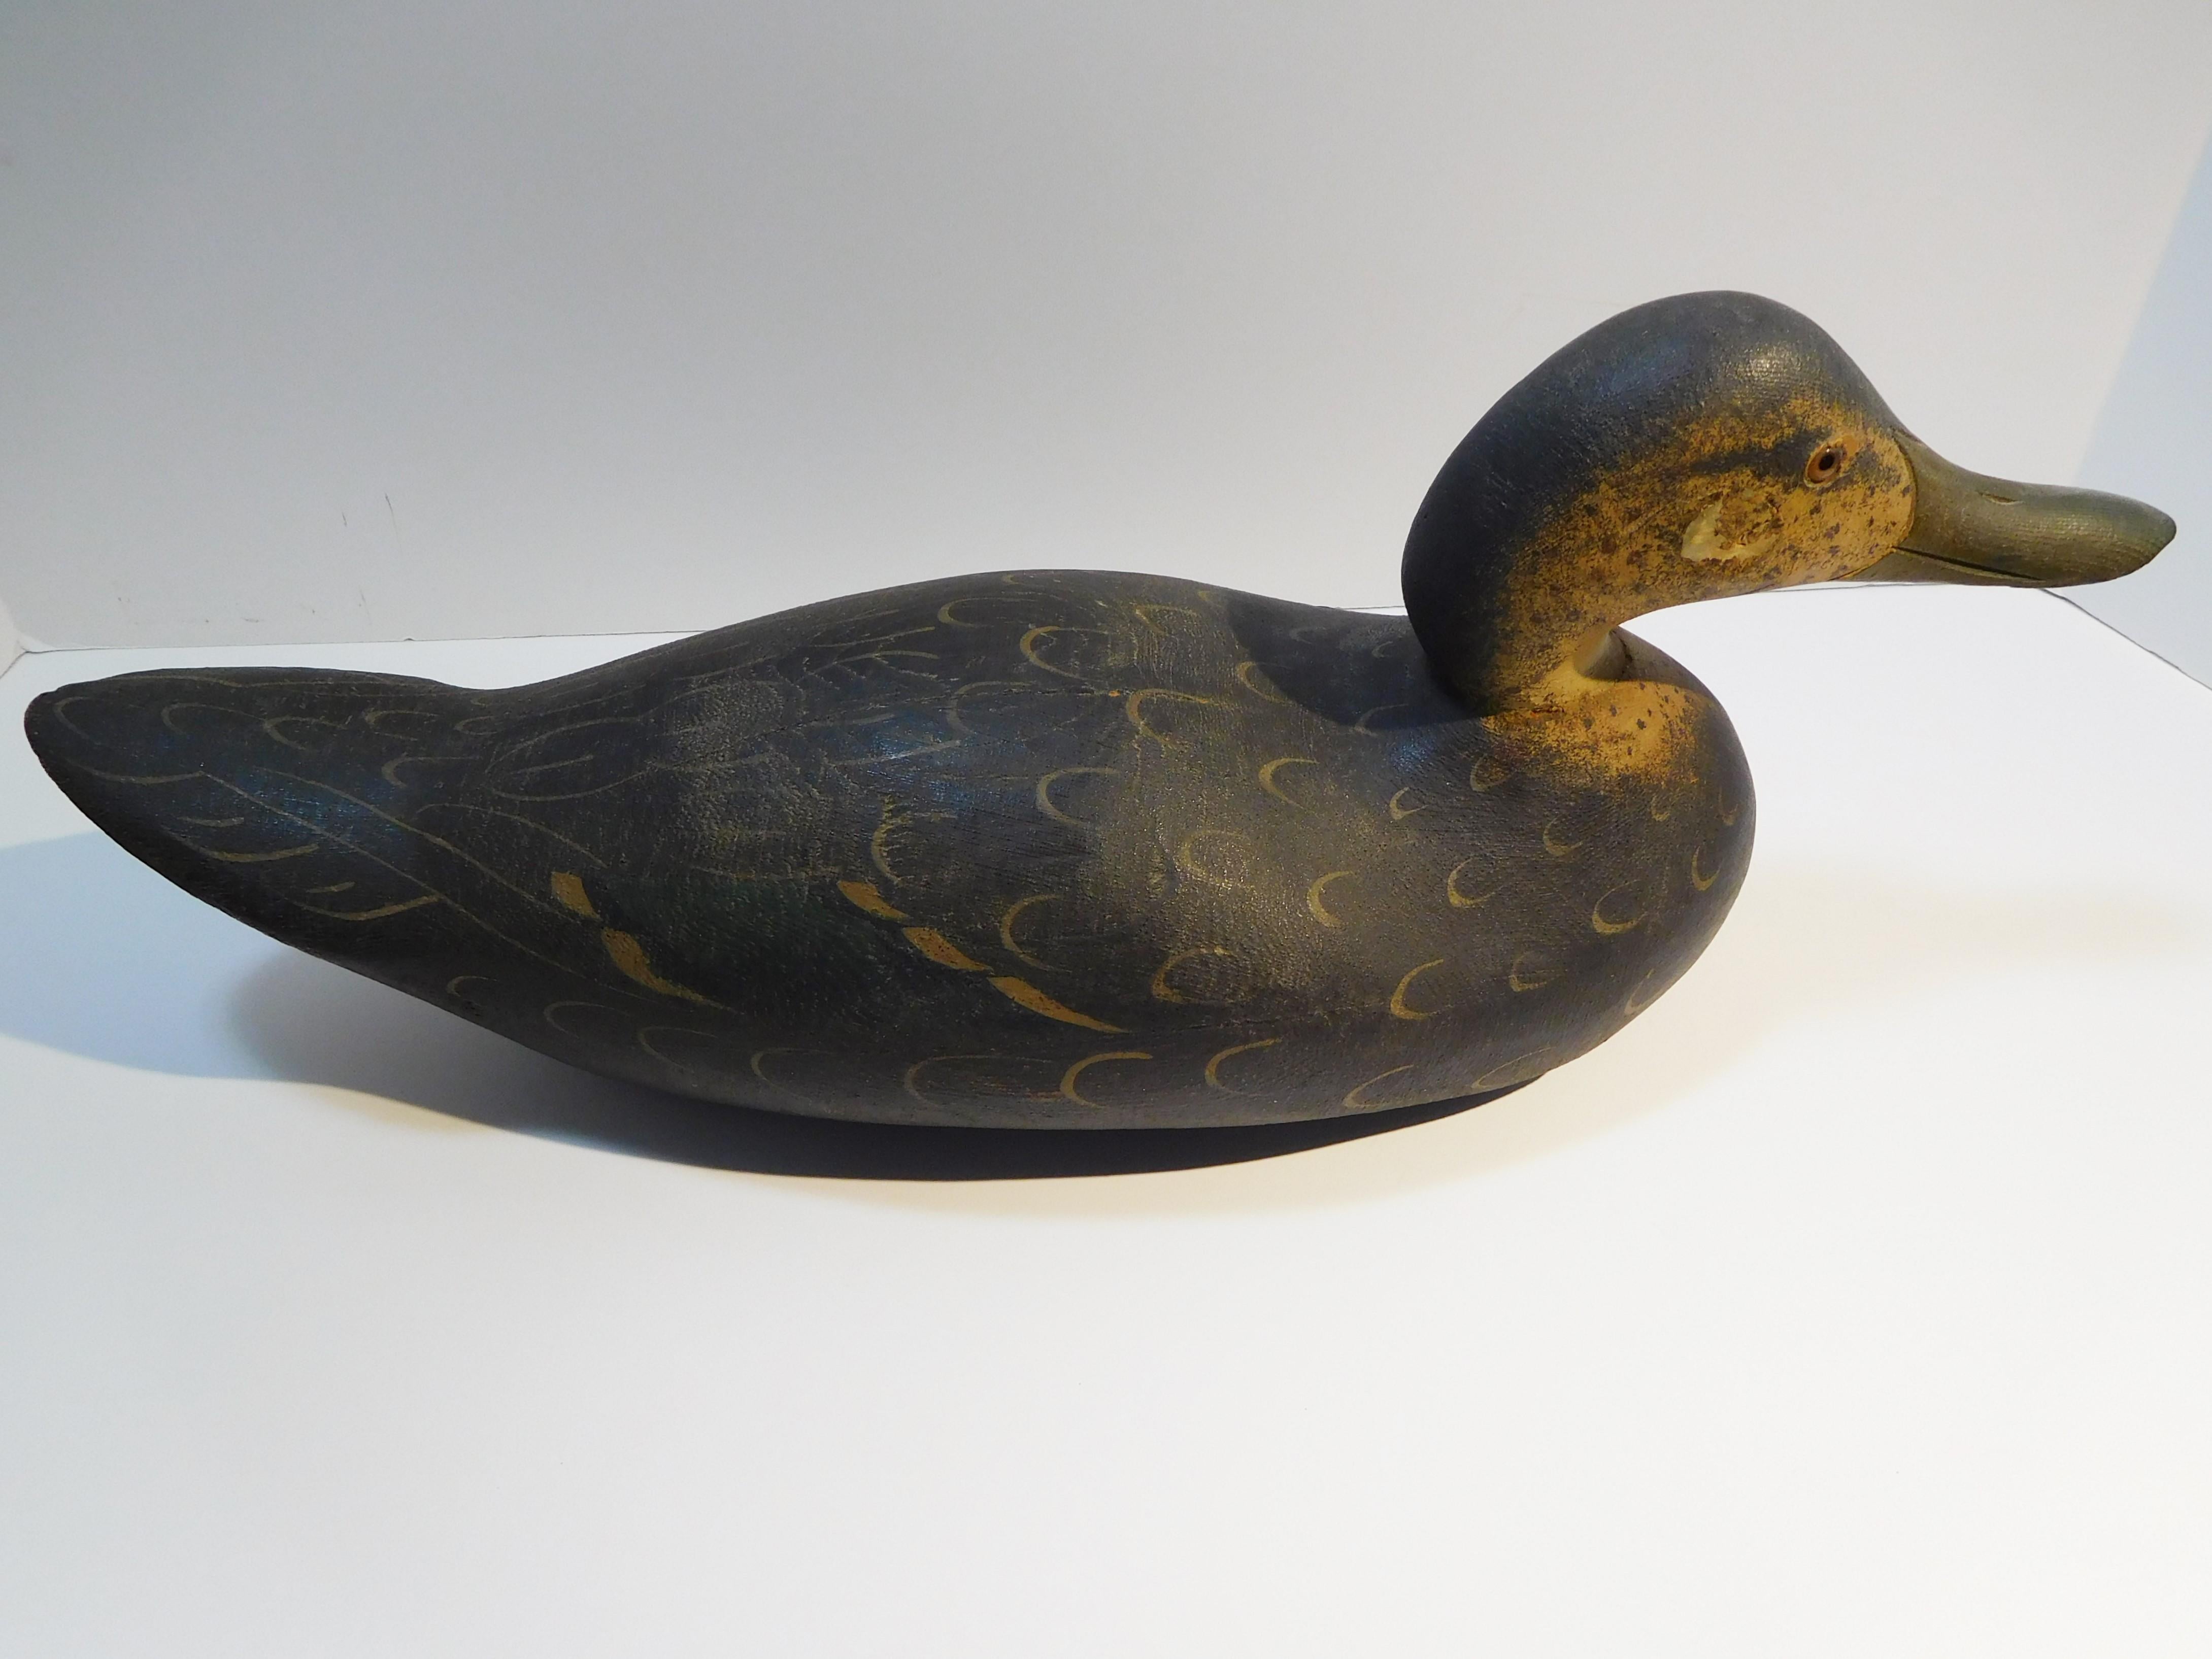 This decoy was made by the Mason Decoy Factory (1896-1924) of Detroit, Michigan, circa 1900. It came from a large rig of Mason black duck decoys assembled in eastern Maine in the early 20th century. The rig was rarely used and it spent most of its